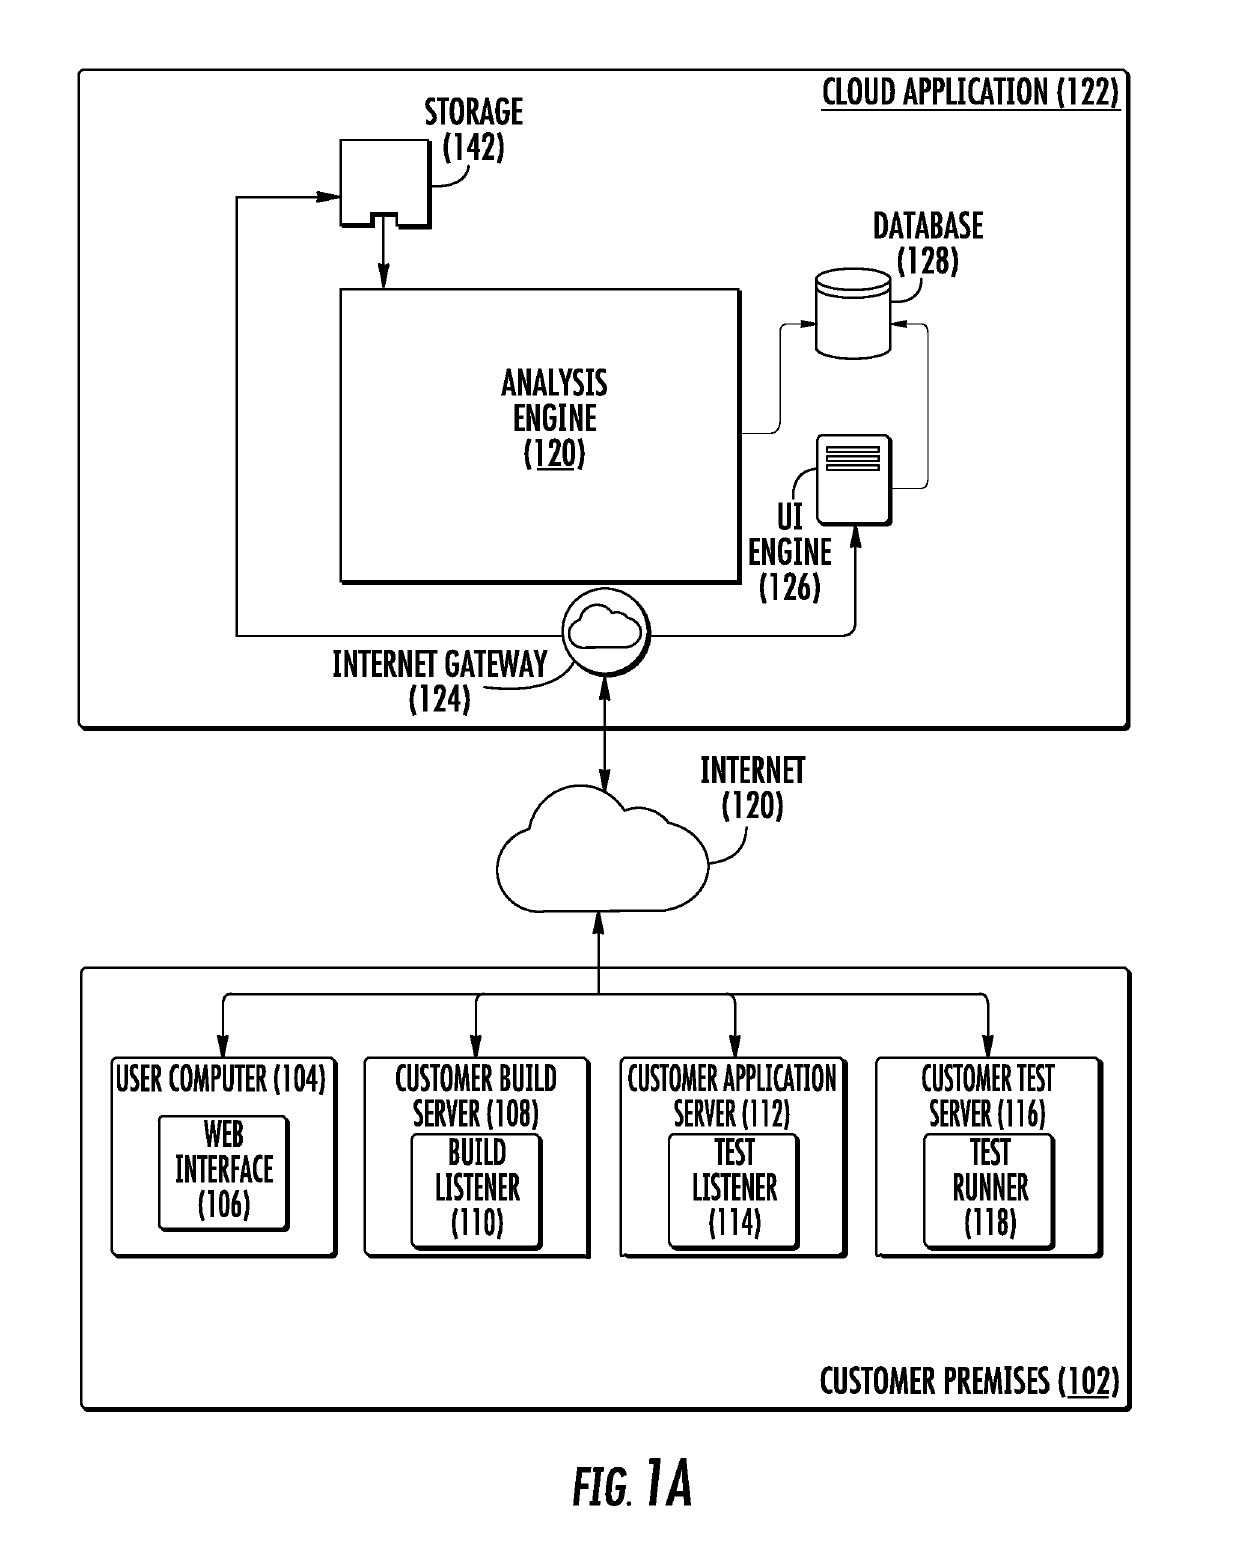 System and method for continuous testing and delivery of software